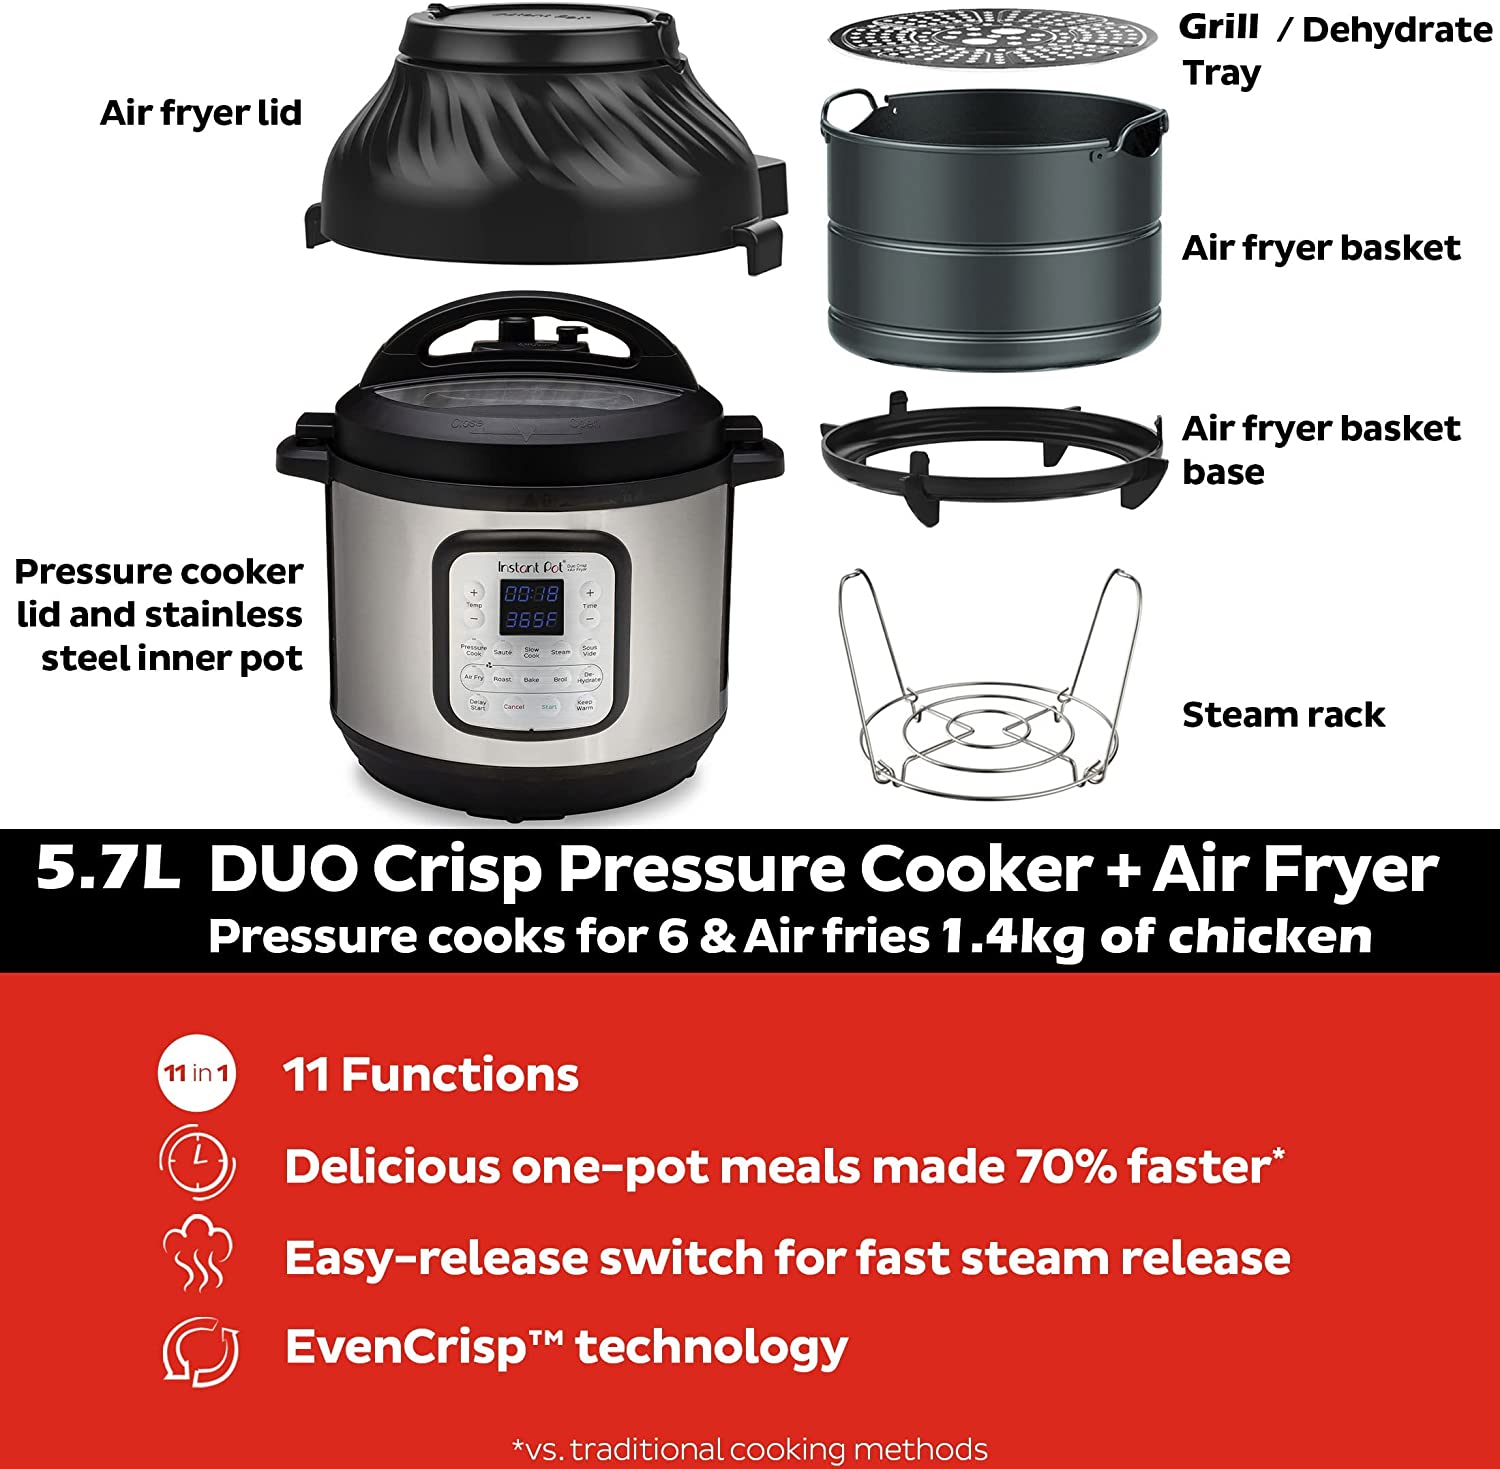 What is the Instant Pot Duo Crisp 11-in-1 Air Fryer and Electric